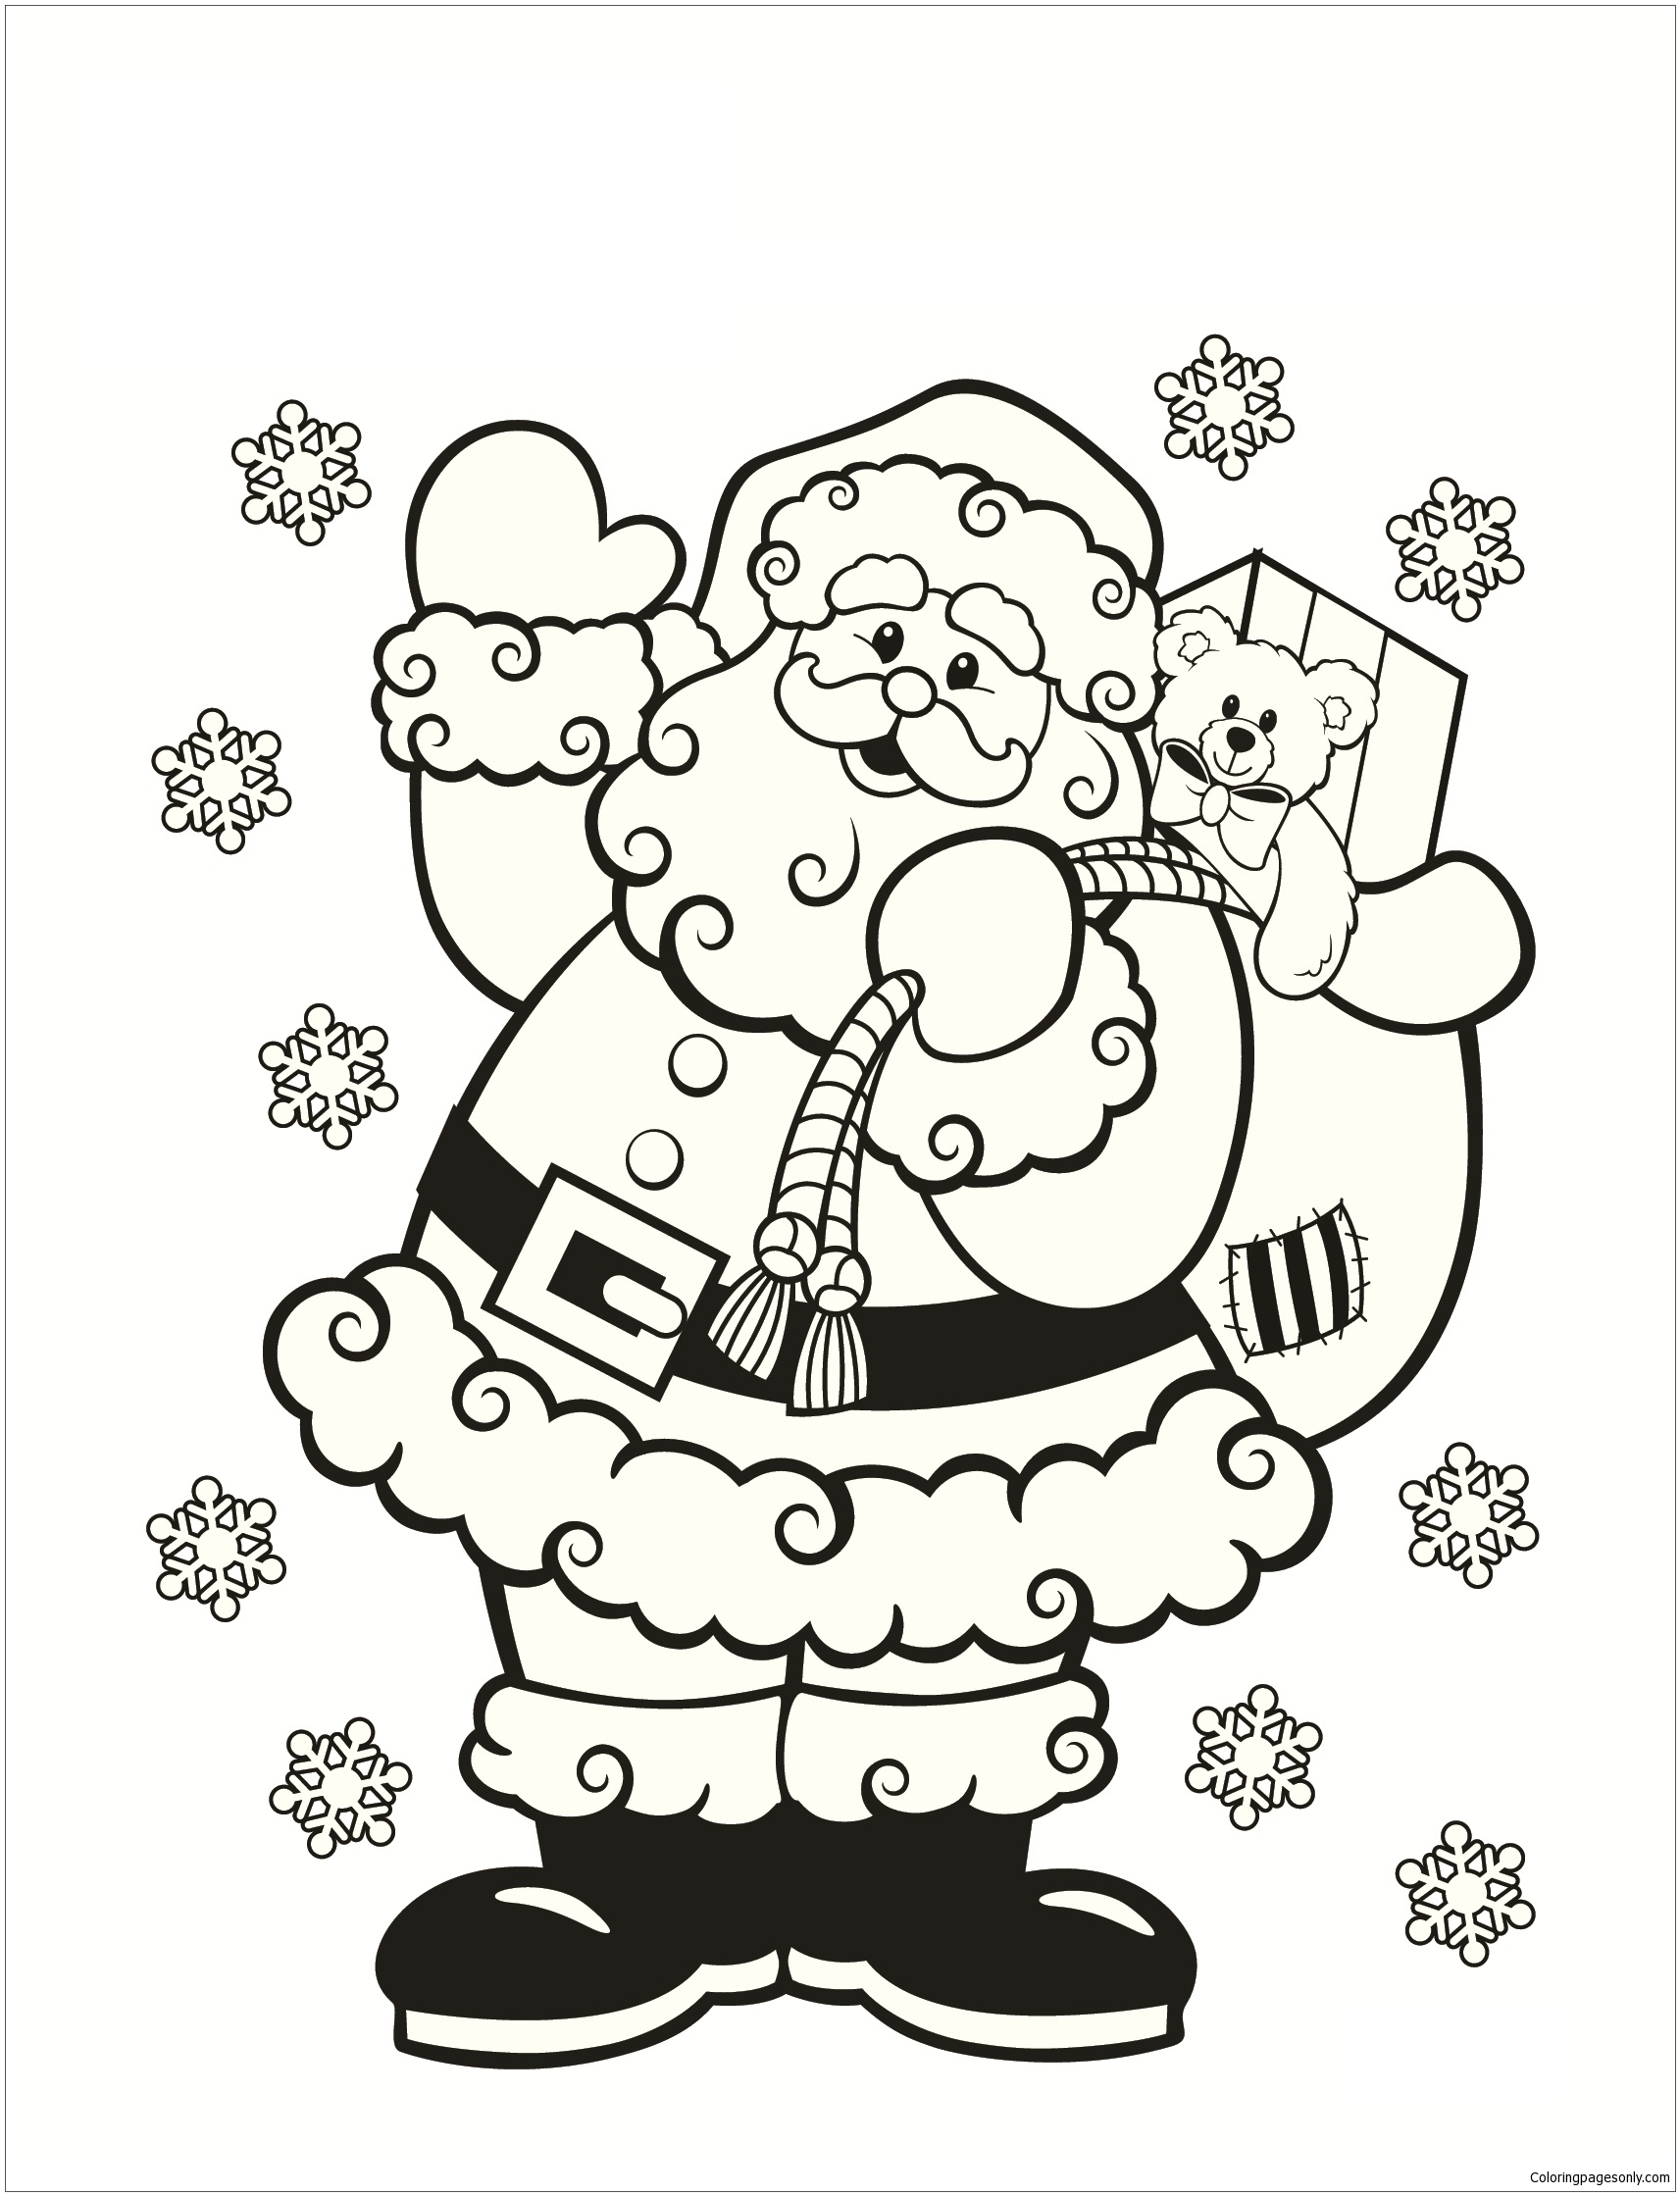 santa-coloring-page-free-coloring-pages-online